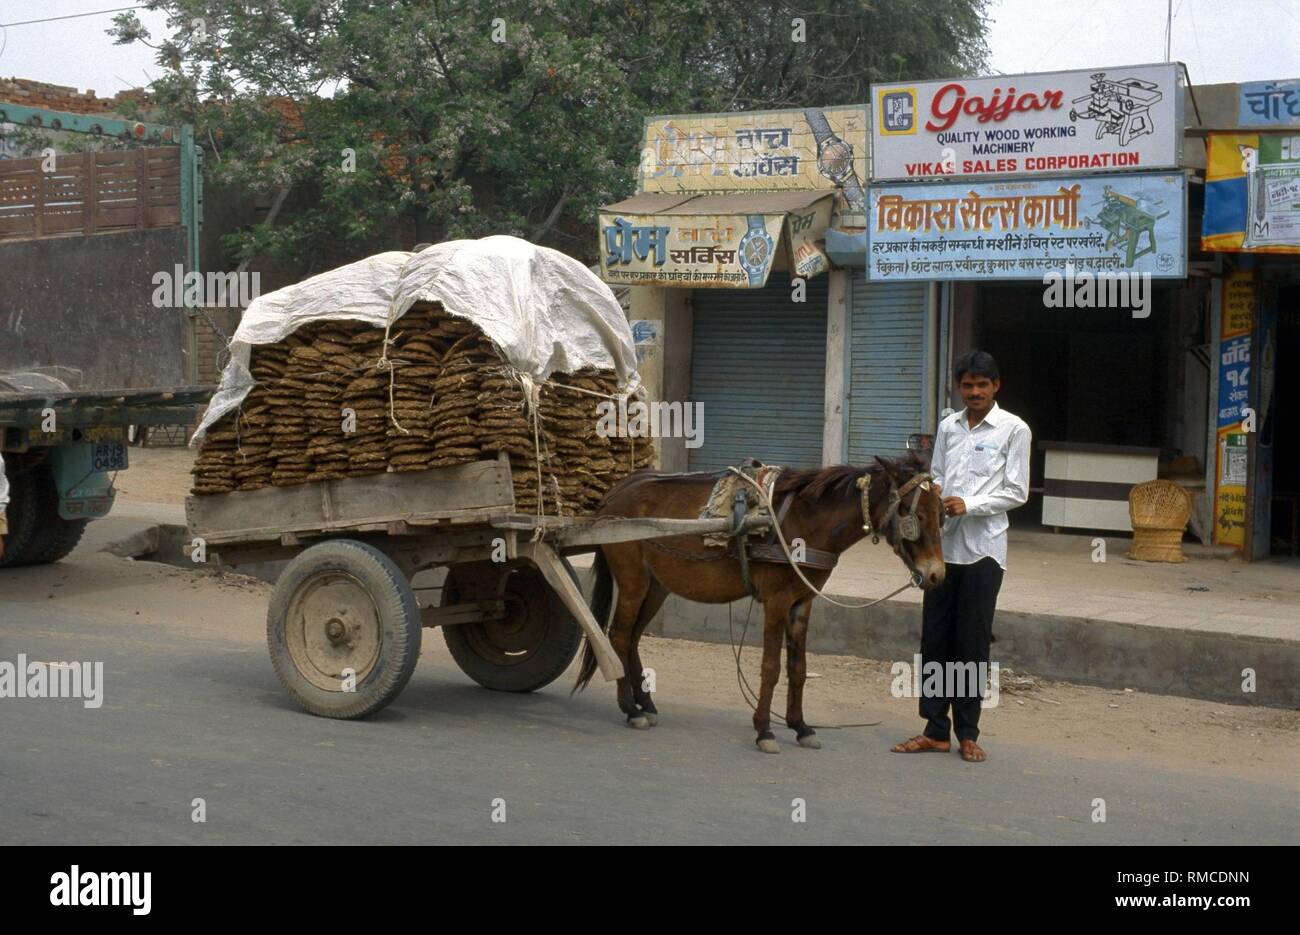 The man with the donkey cart sells dried cow dung in the cities. Cow pies are the only combustible material to cook food. Stock Photo